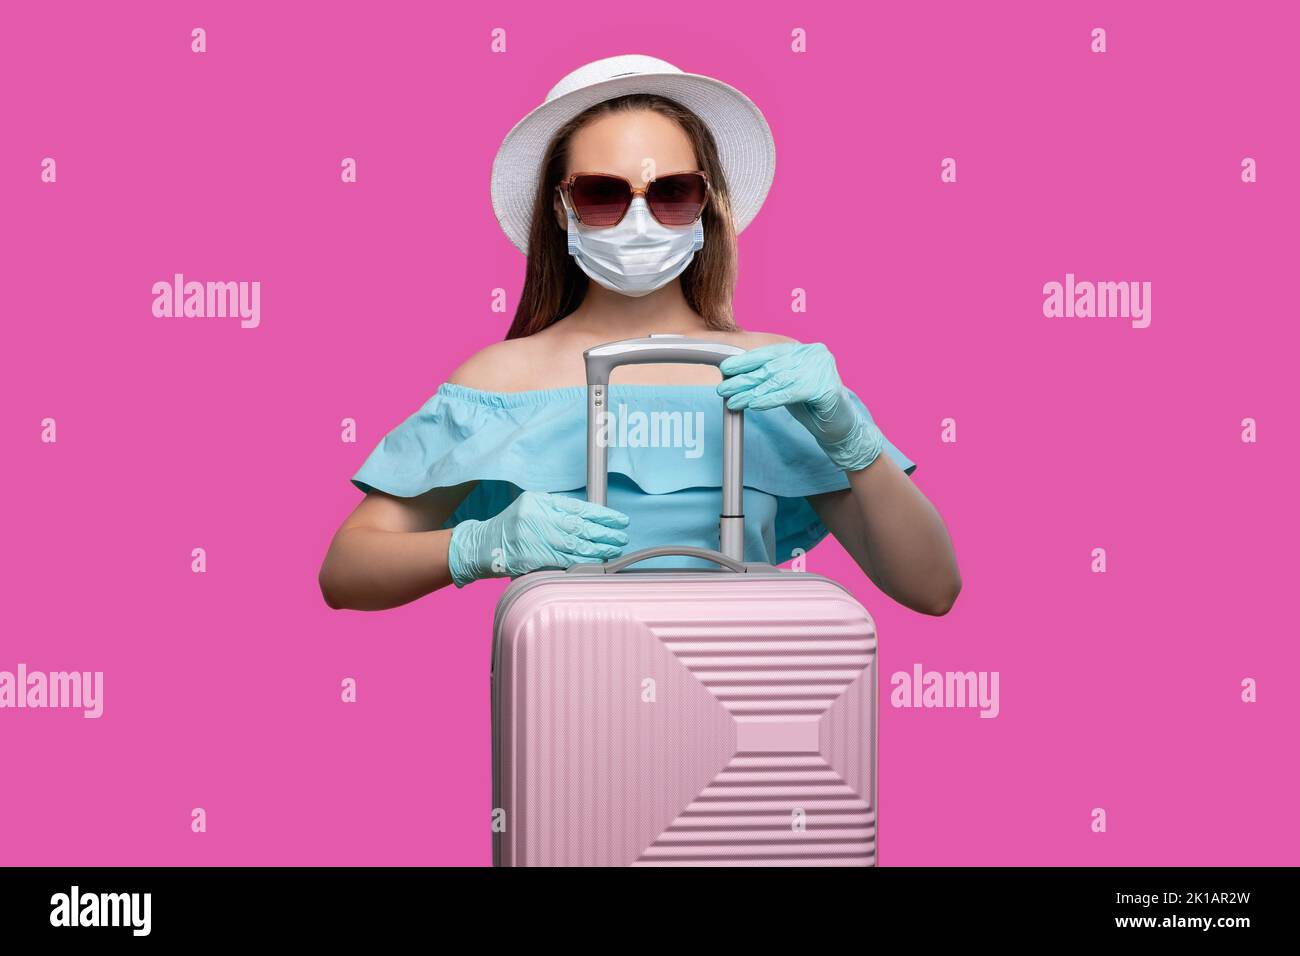 Borders opened. COVID-19 prevention. Woman with suitcase isolated on lilac. Pandemic measures. Ready for traveling. Summer vacation Stock Photo